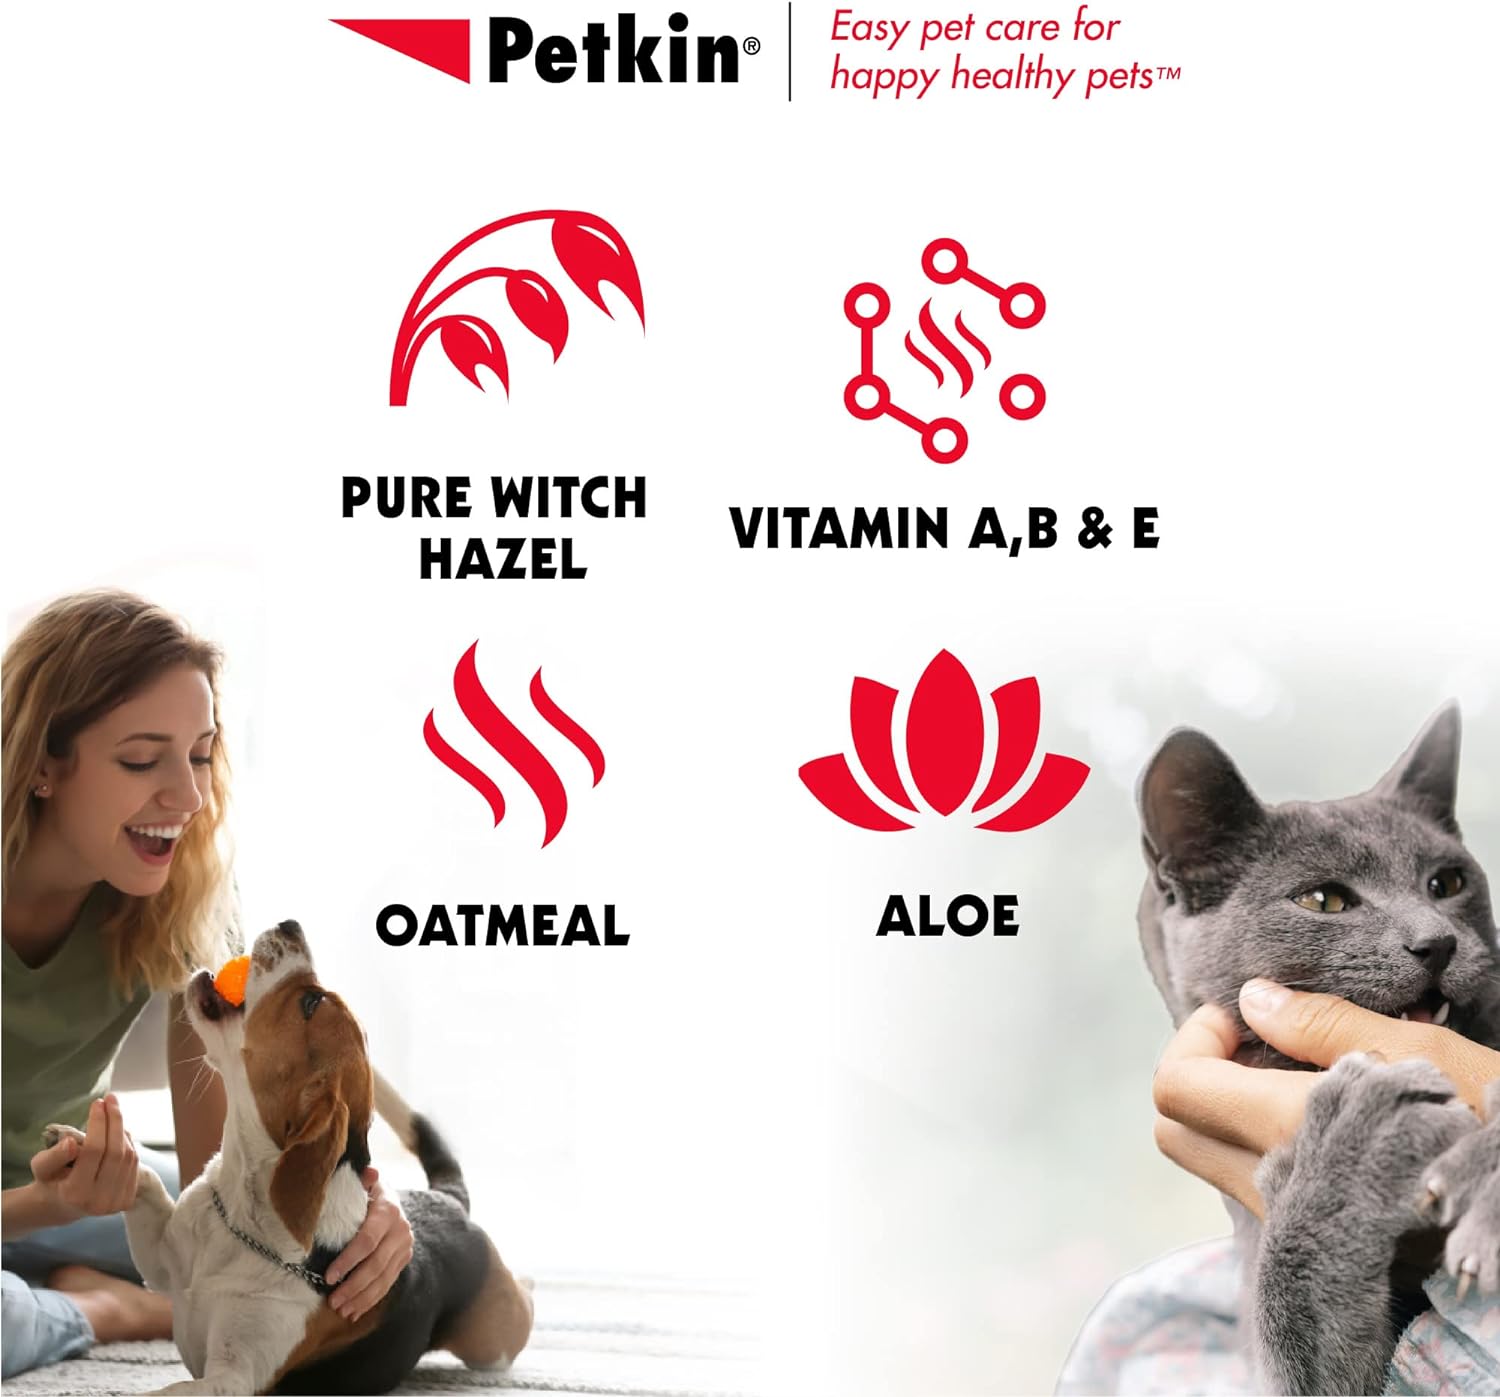 Petkin Anti Itch Wipes for Dogs and Cats - Soothes Hot Spots, Skin Irritations and Scratching - Bitter Taste Stops Licking and Chewing - Super Convenient, Ideal for Home or Travel - 30 Wipes : Pet Supplies